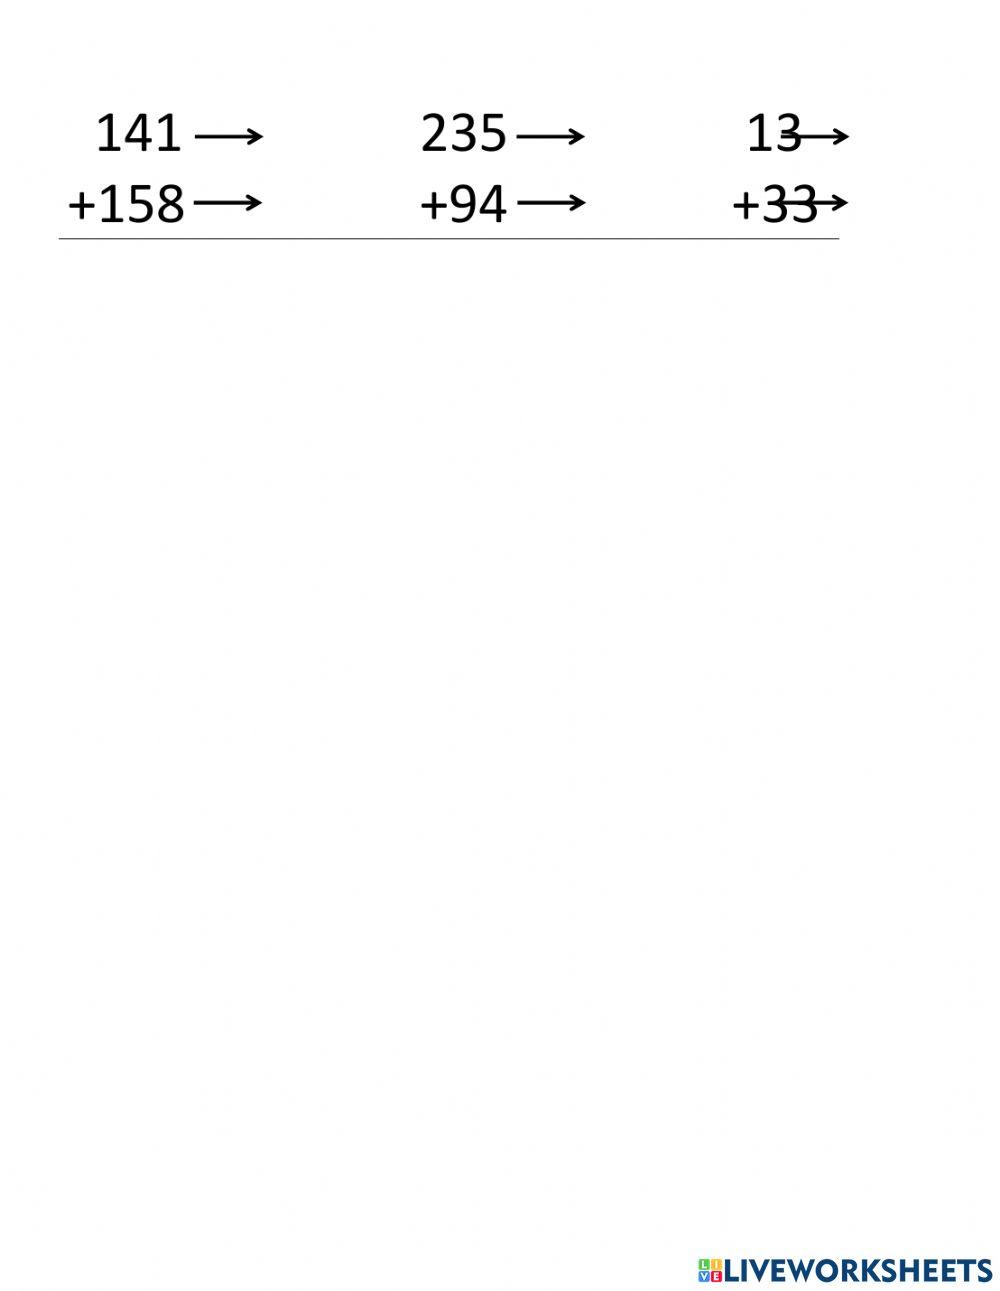 Estimation of Numbers